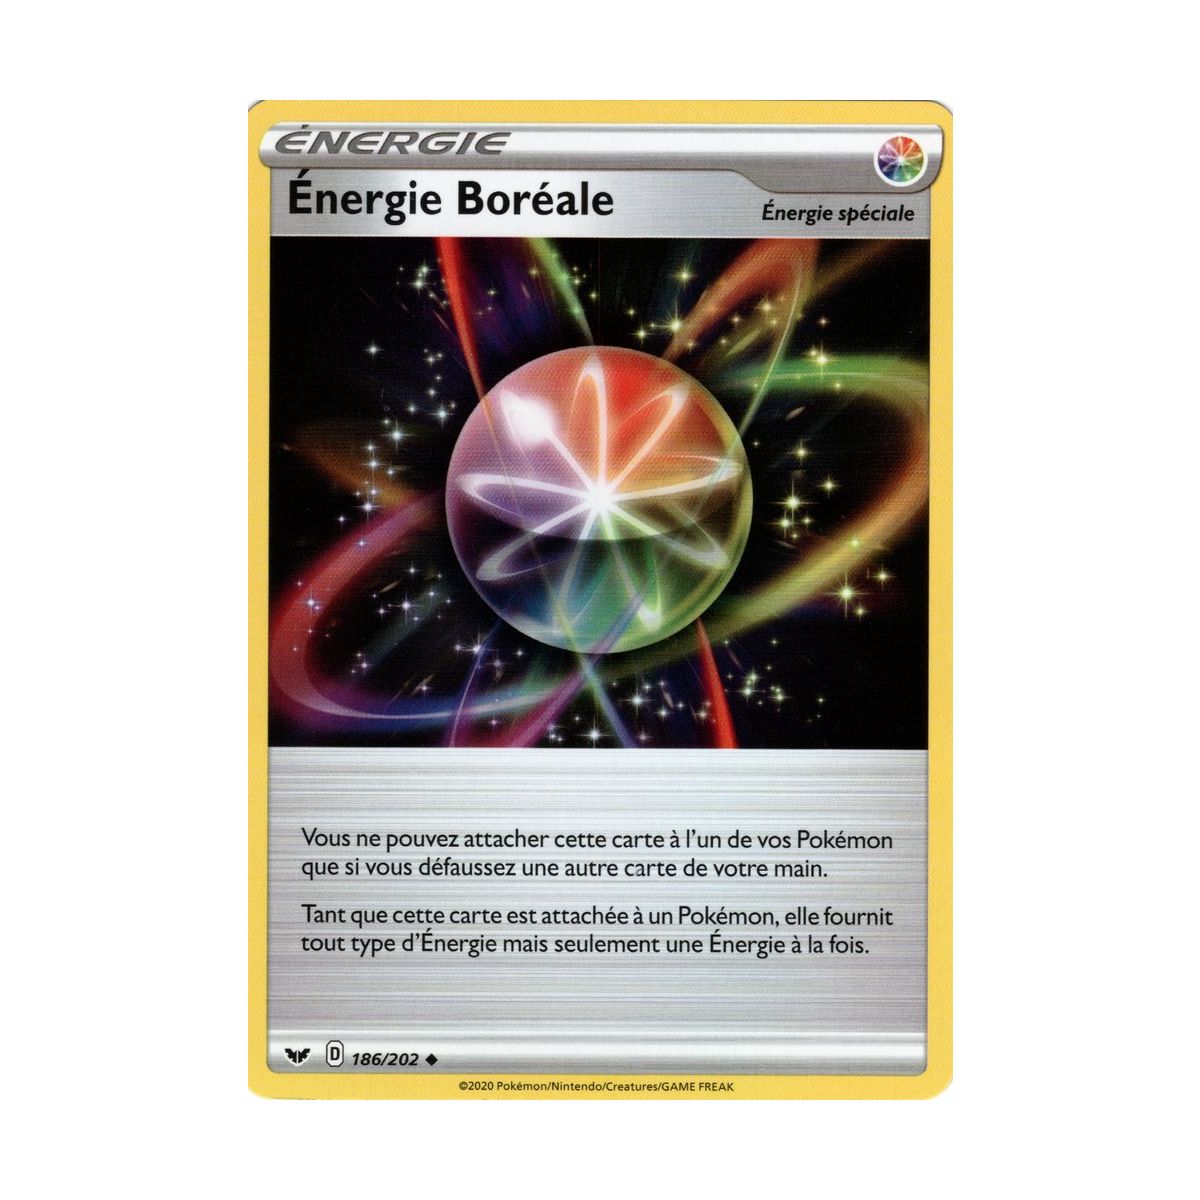 Boreal Energy - Uncommon 186/202 - Sword and Shield 1